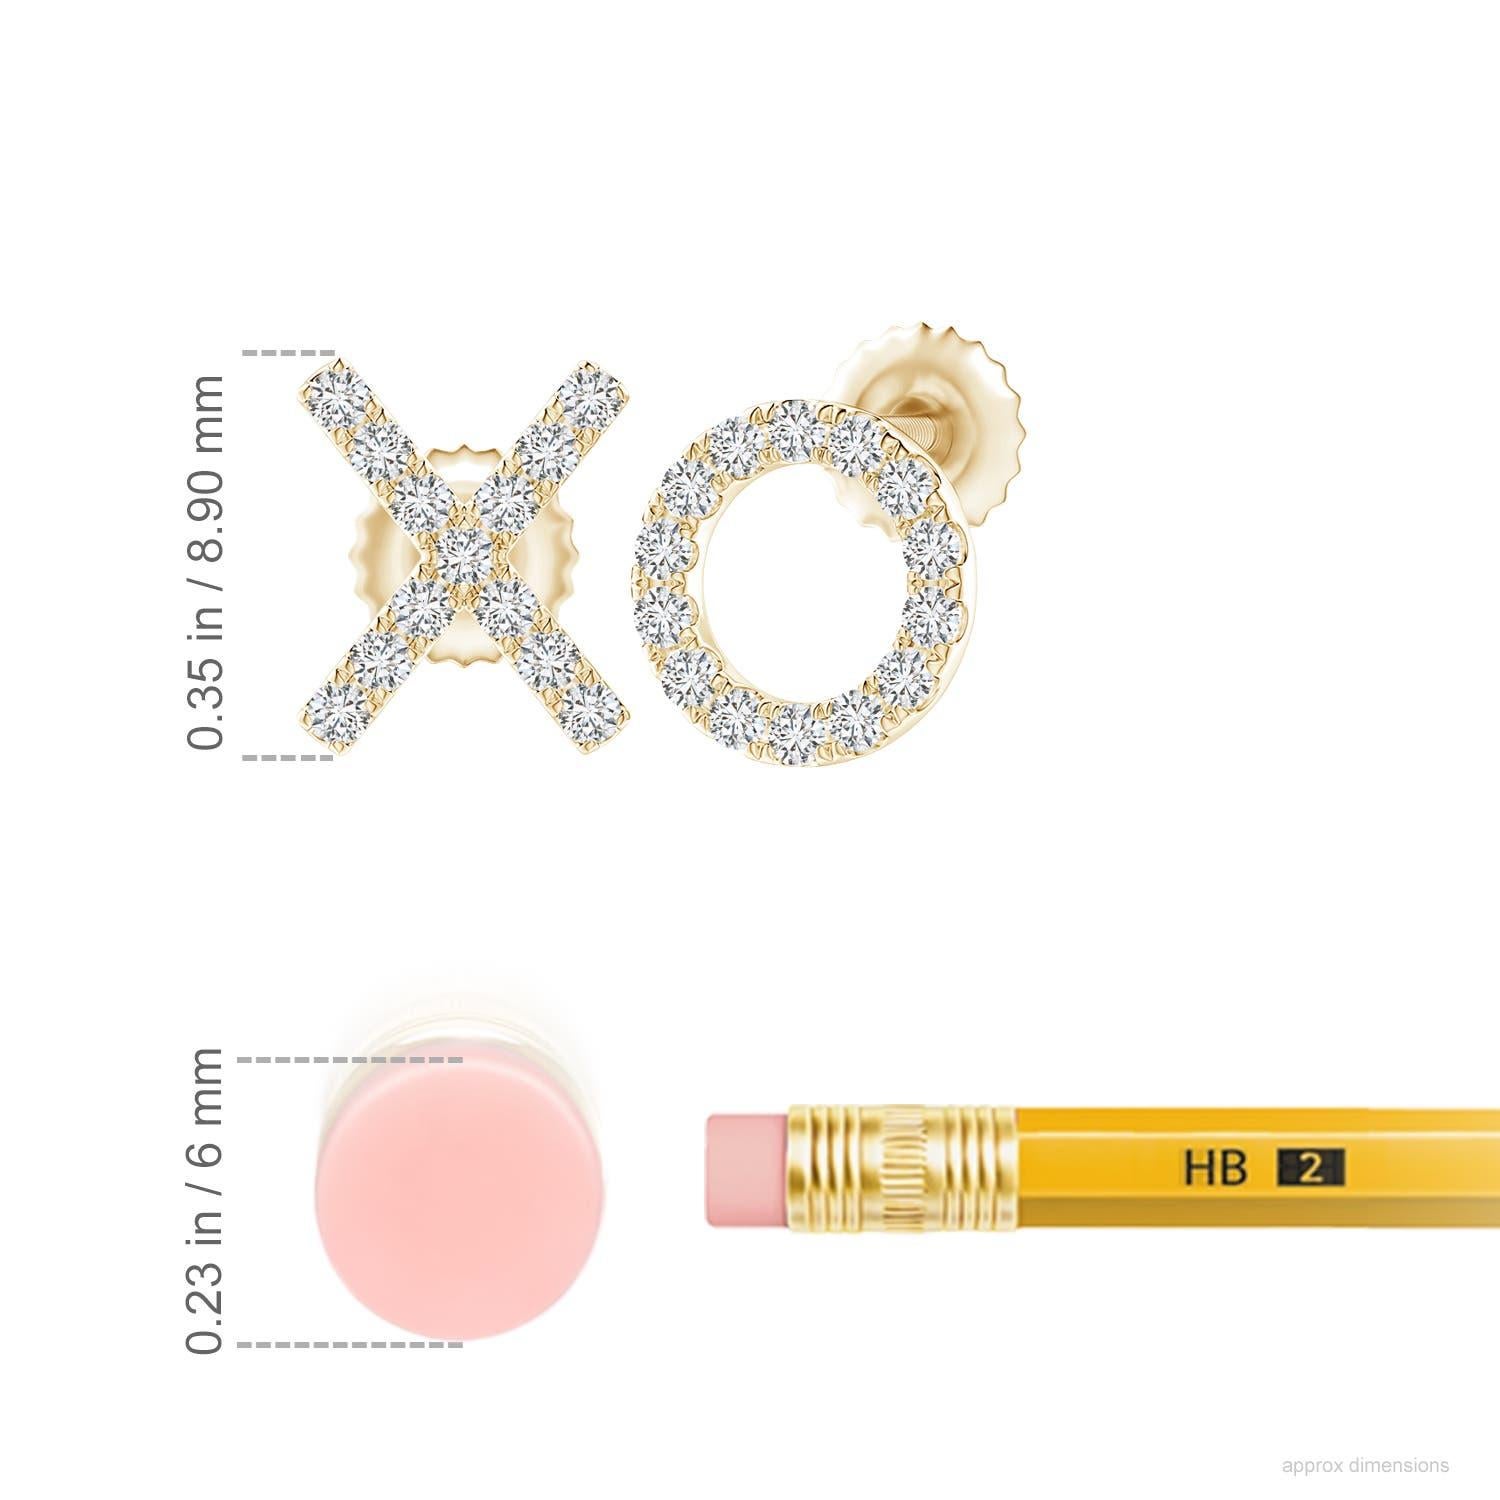 The XO stud earrings designed in 14k yellow gold are simply fascinating. Sparkling round diamonds in a U pava setting brilliantly embellish the XO pattern, adding a dazzling touch to these adorable stud earrings.
Diamond is the Birthstone for April